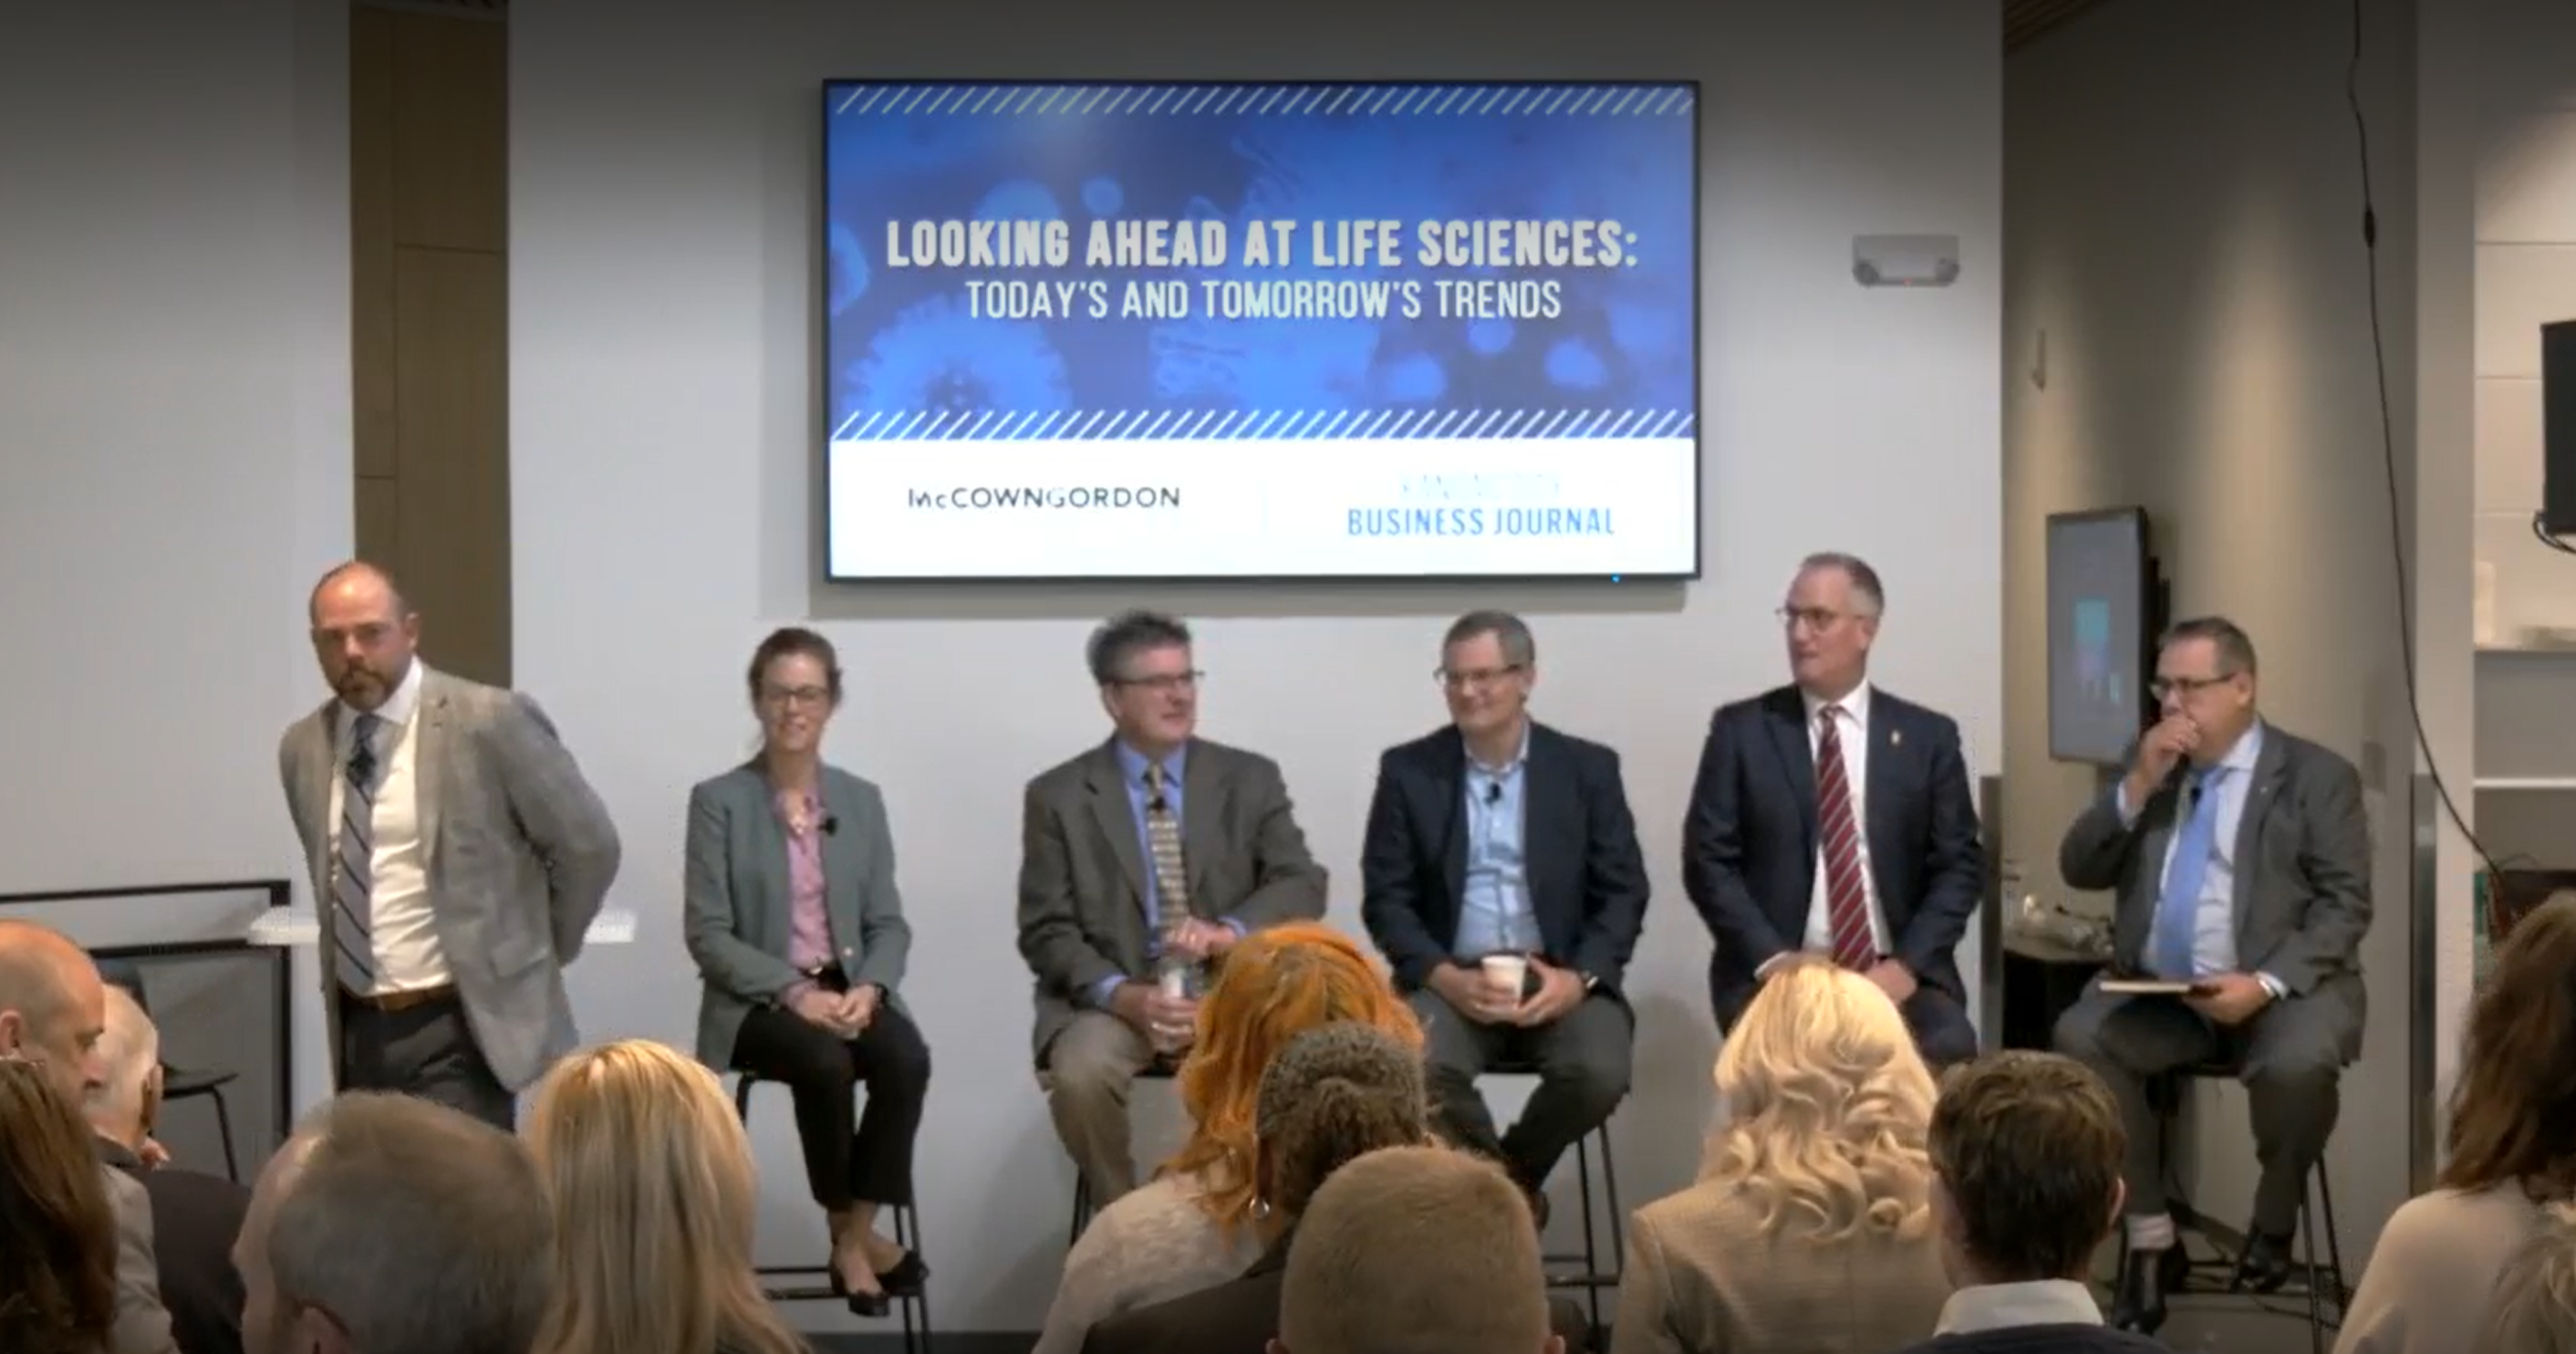 Looking ahead at life sciences: Today’s and tomorrow’s trends